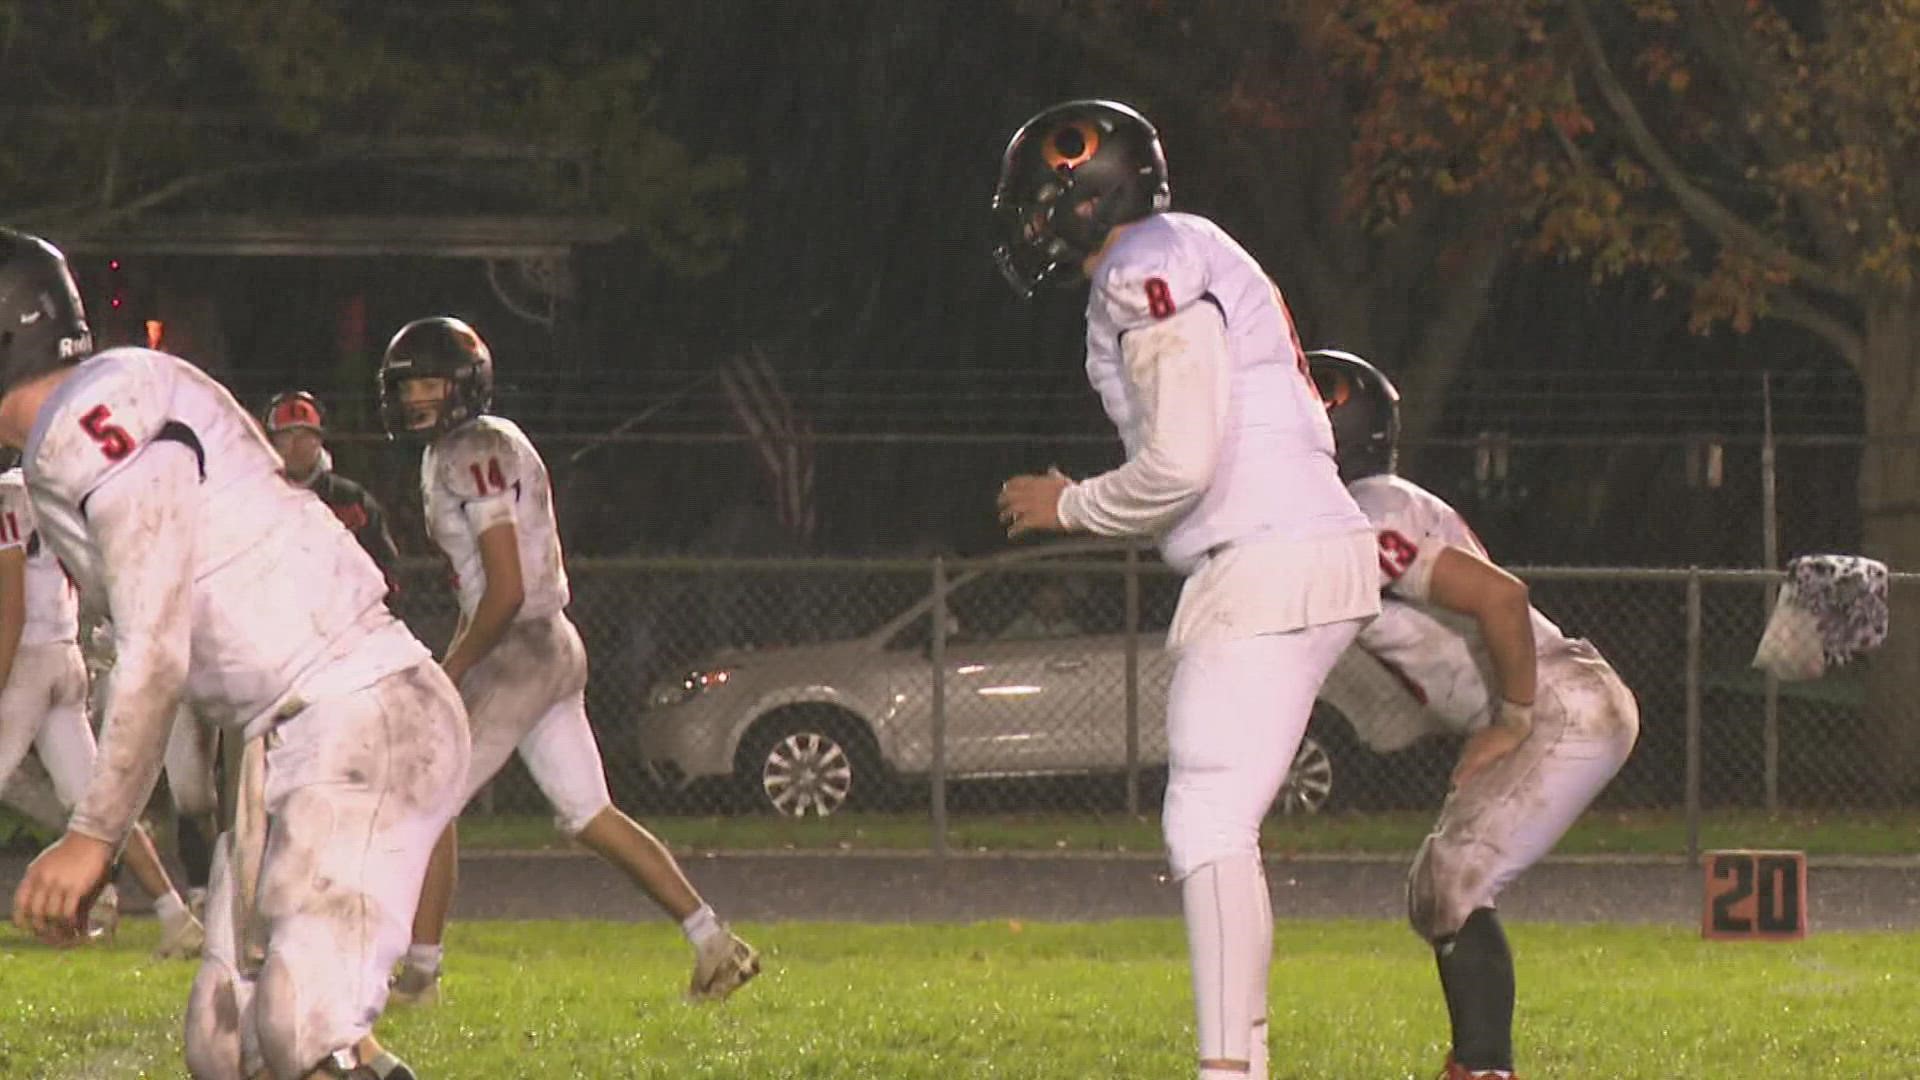 North Muskegon's defense pitches a shutout, winning 25 to nothing.